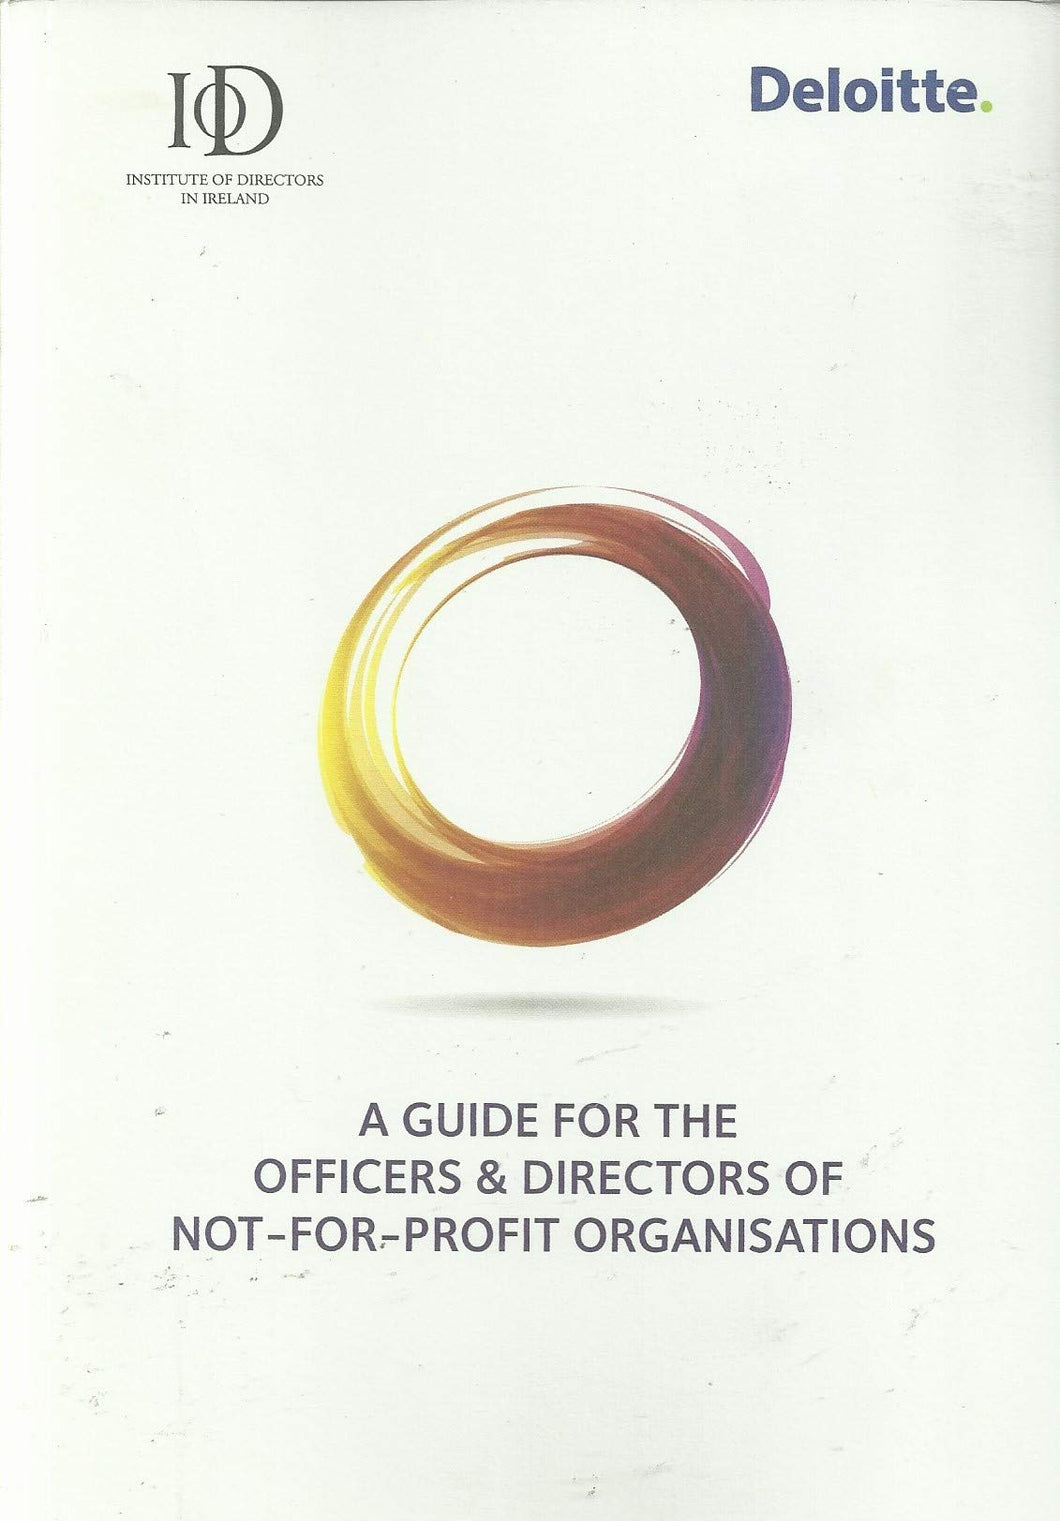 A Guide for the Officers and Directors of Not-For-Profit Organisations - Institute of Directors in Ireland/Deloitte